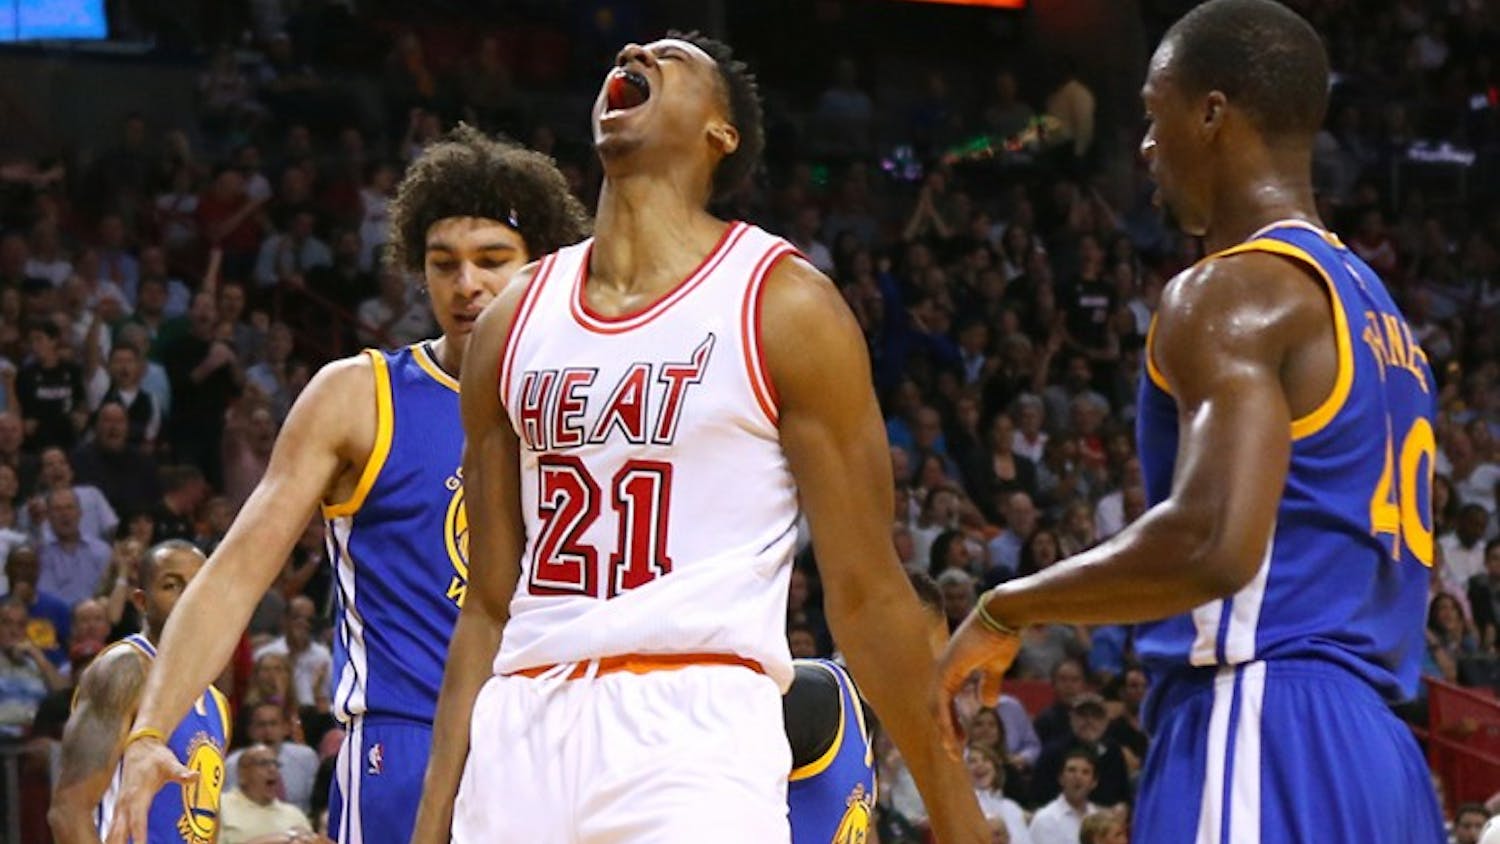 The Miami Heat&apos;s Hassan Whiteside, middle, reacts after dunking during the first quarter against the Golden State Warriors at the AmericanAirlines Arena in Miami on Wednesday, Feb. 24, 2016. (David Santiago/Miami Herald/TNS)